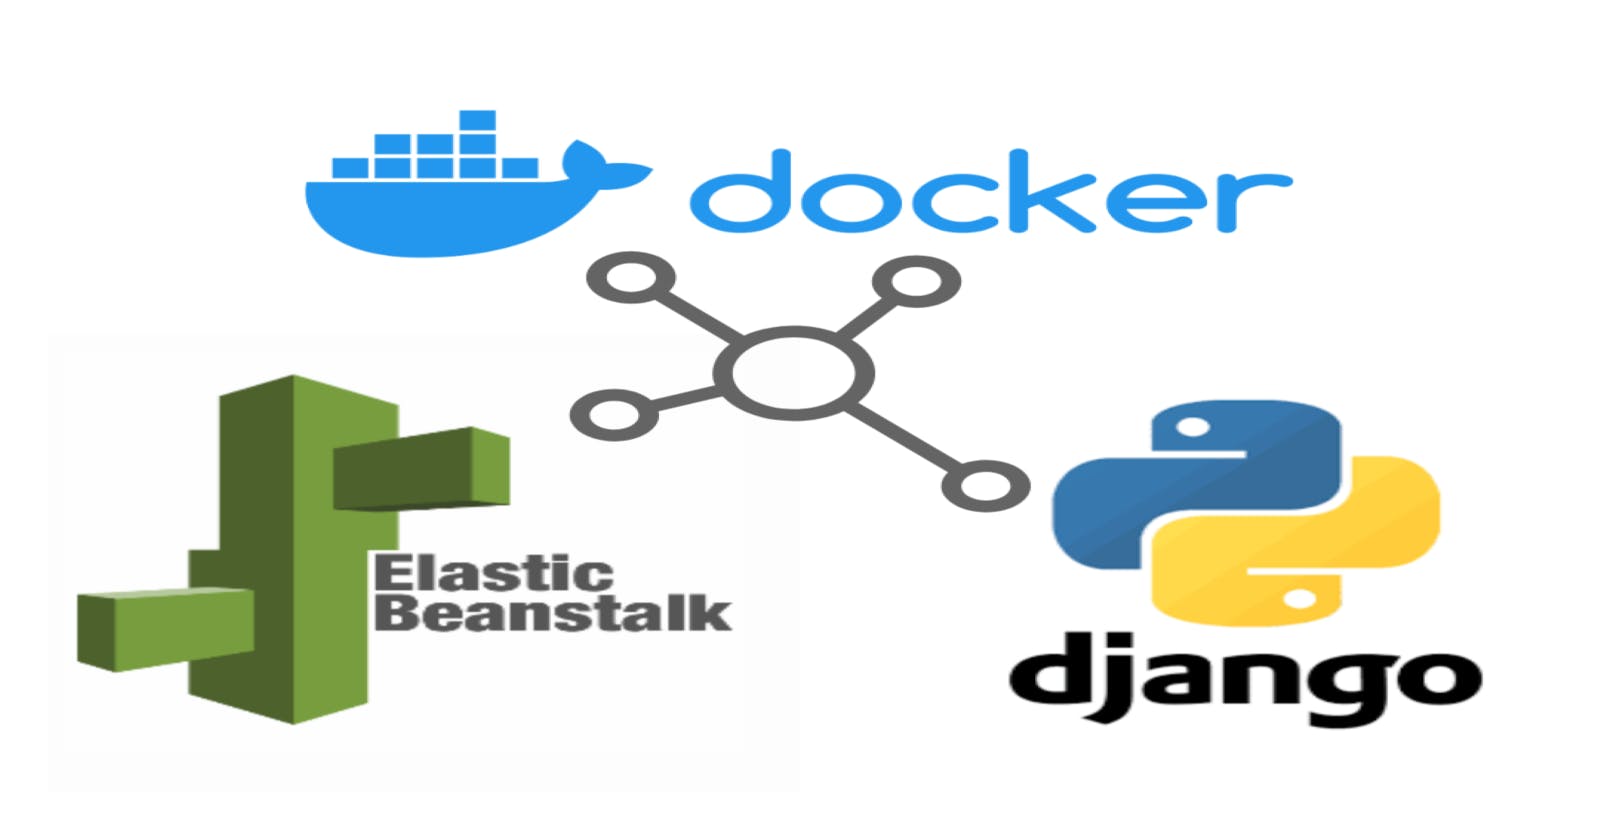 Introduction to Elastic Beanstalk with Django, RDS, Docker and Nginx